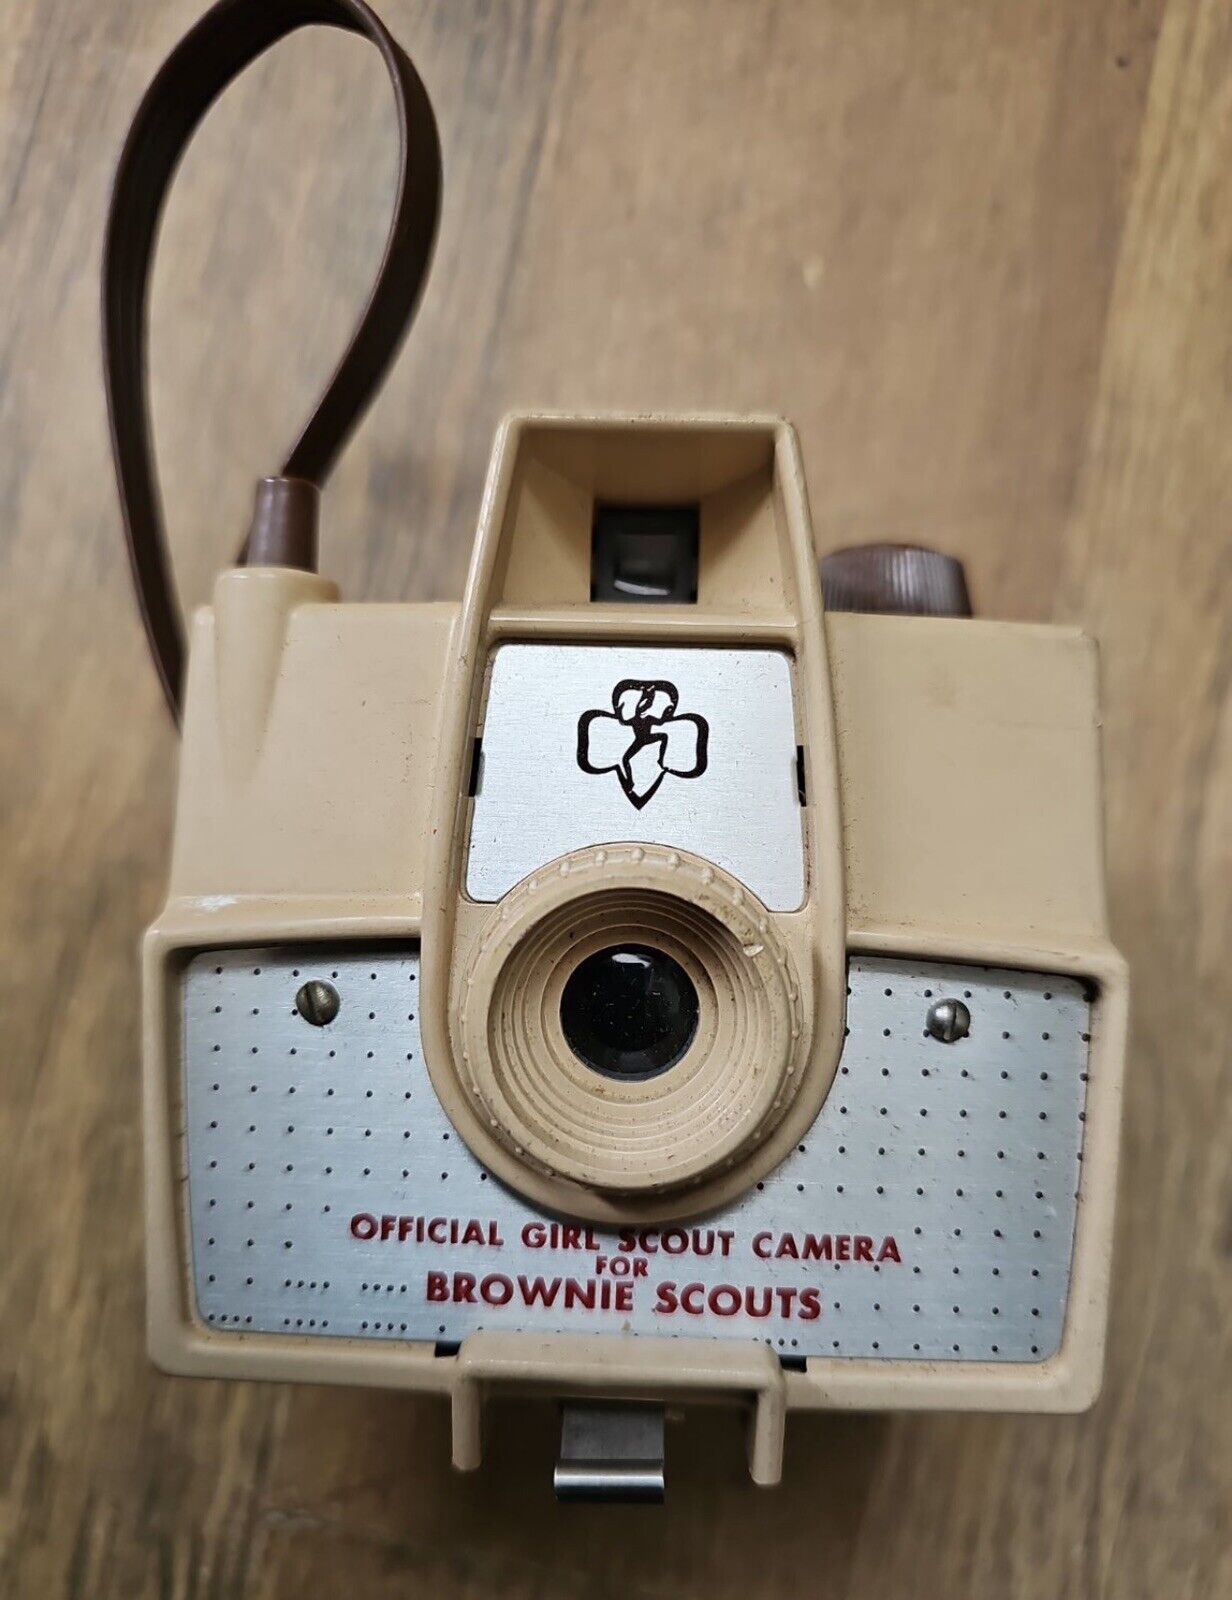 Official Girl Scout Camera for Brownie Scouts